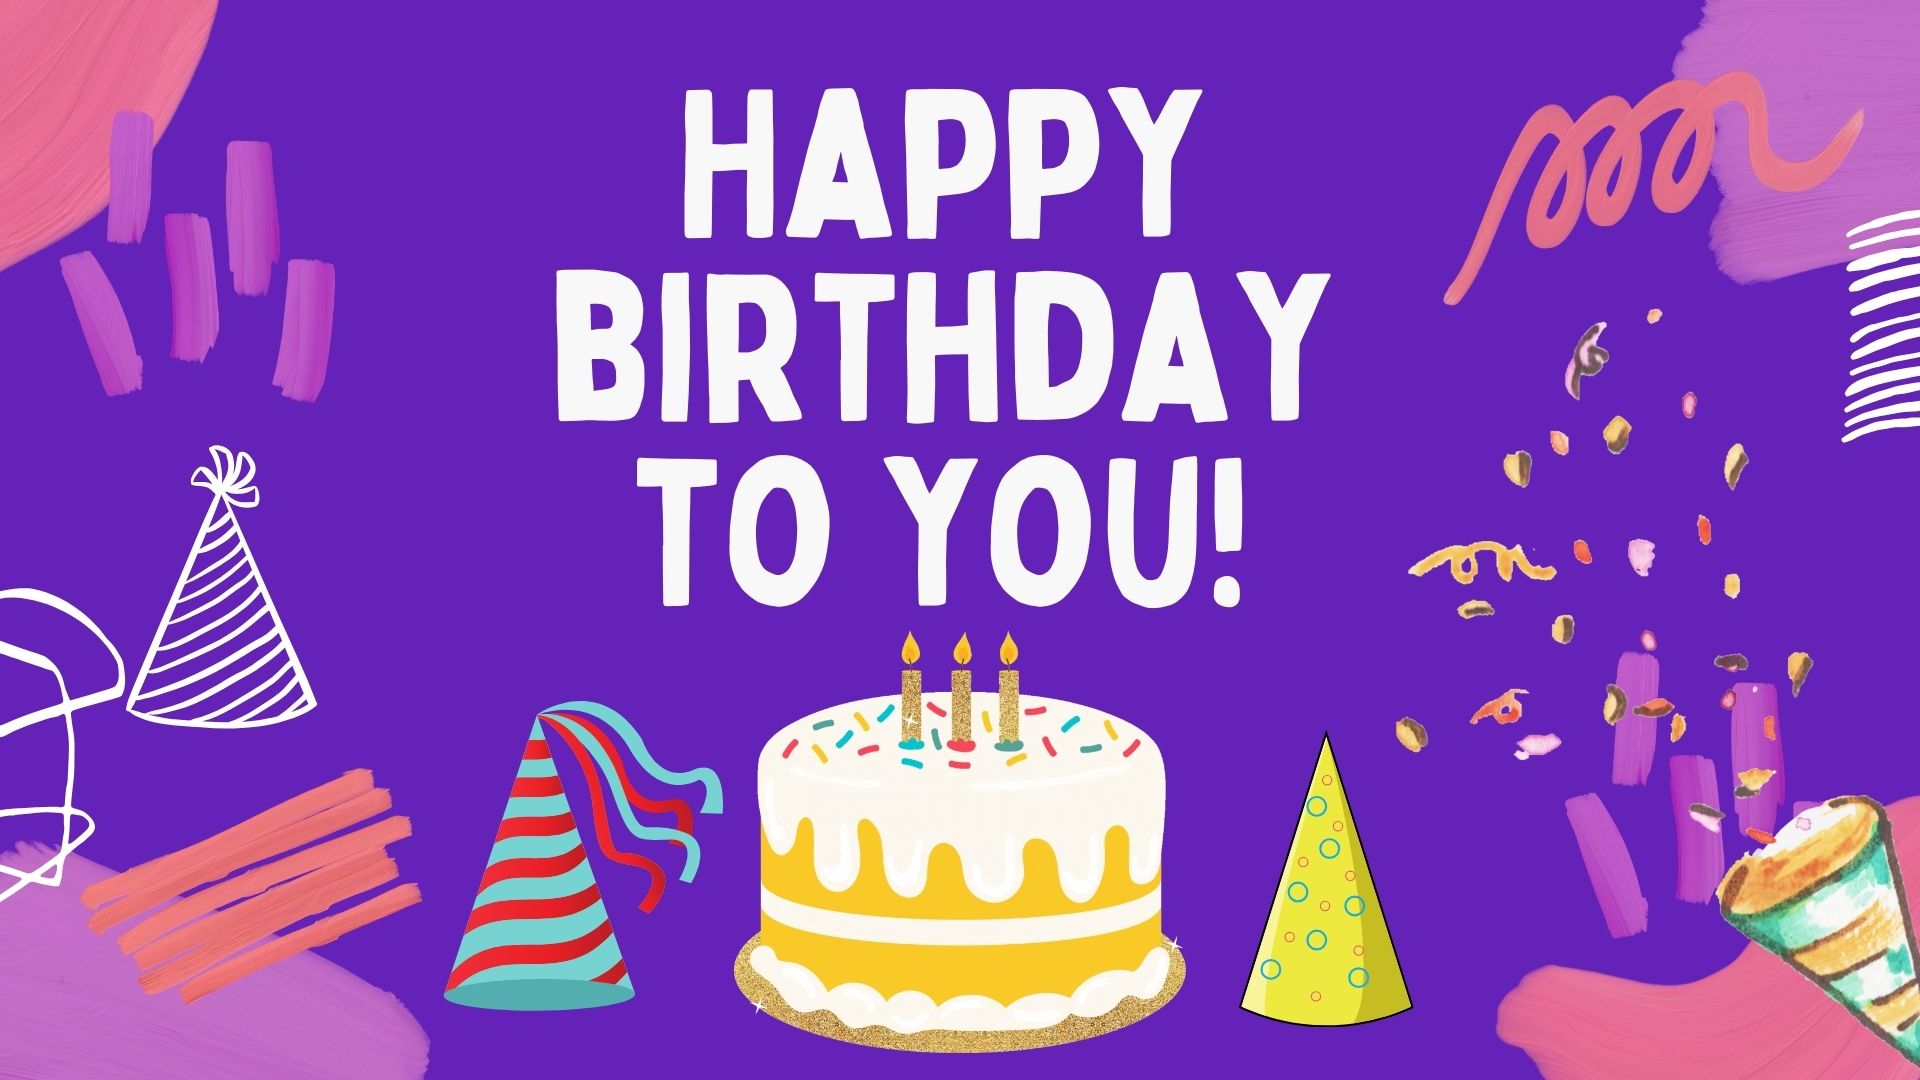 Download Free Happy Birthday to You Parpal Background for Websites, Slideshows, and Designs | Royalty-Free and Unlimited Use.